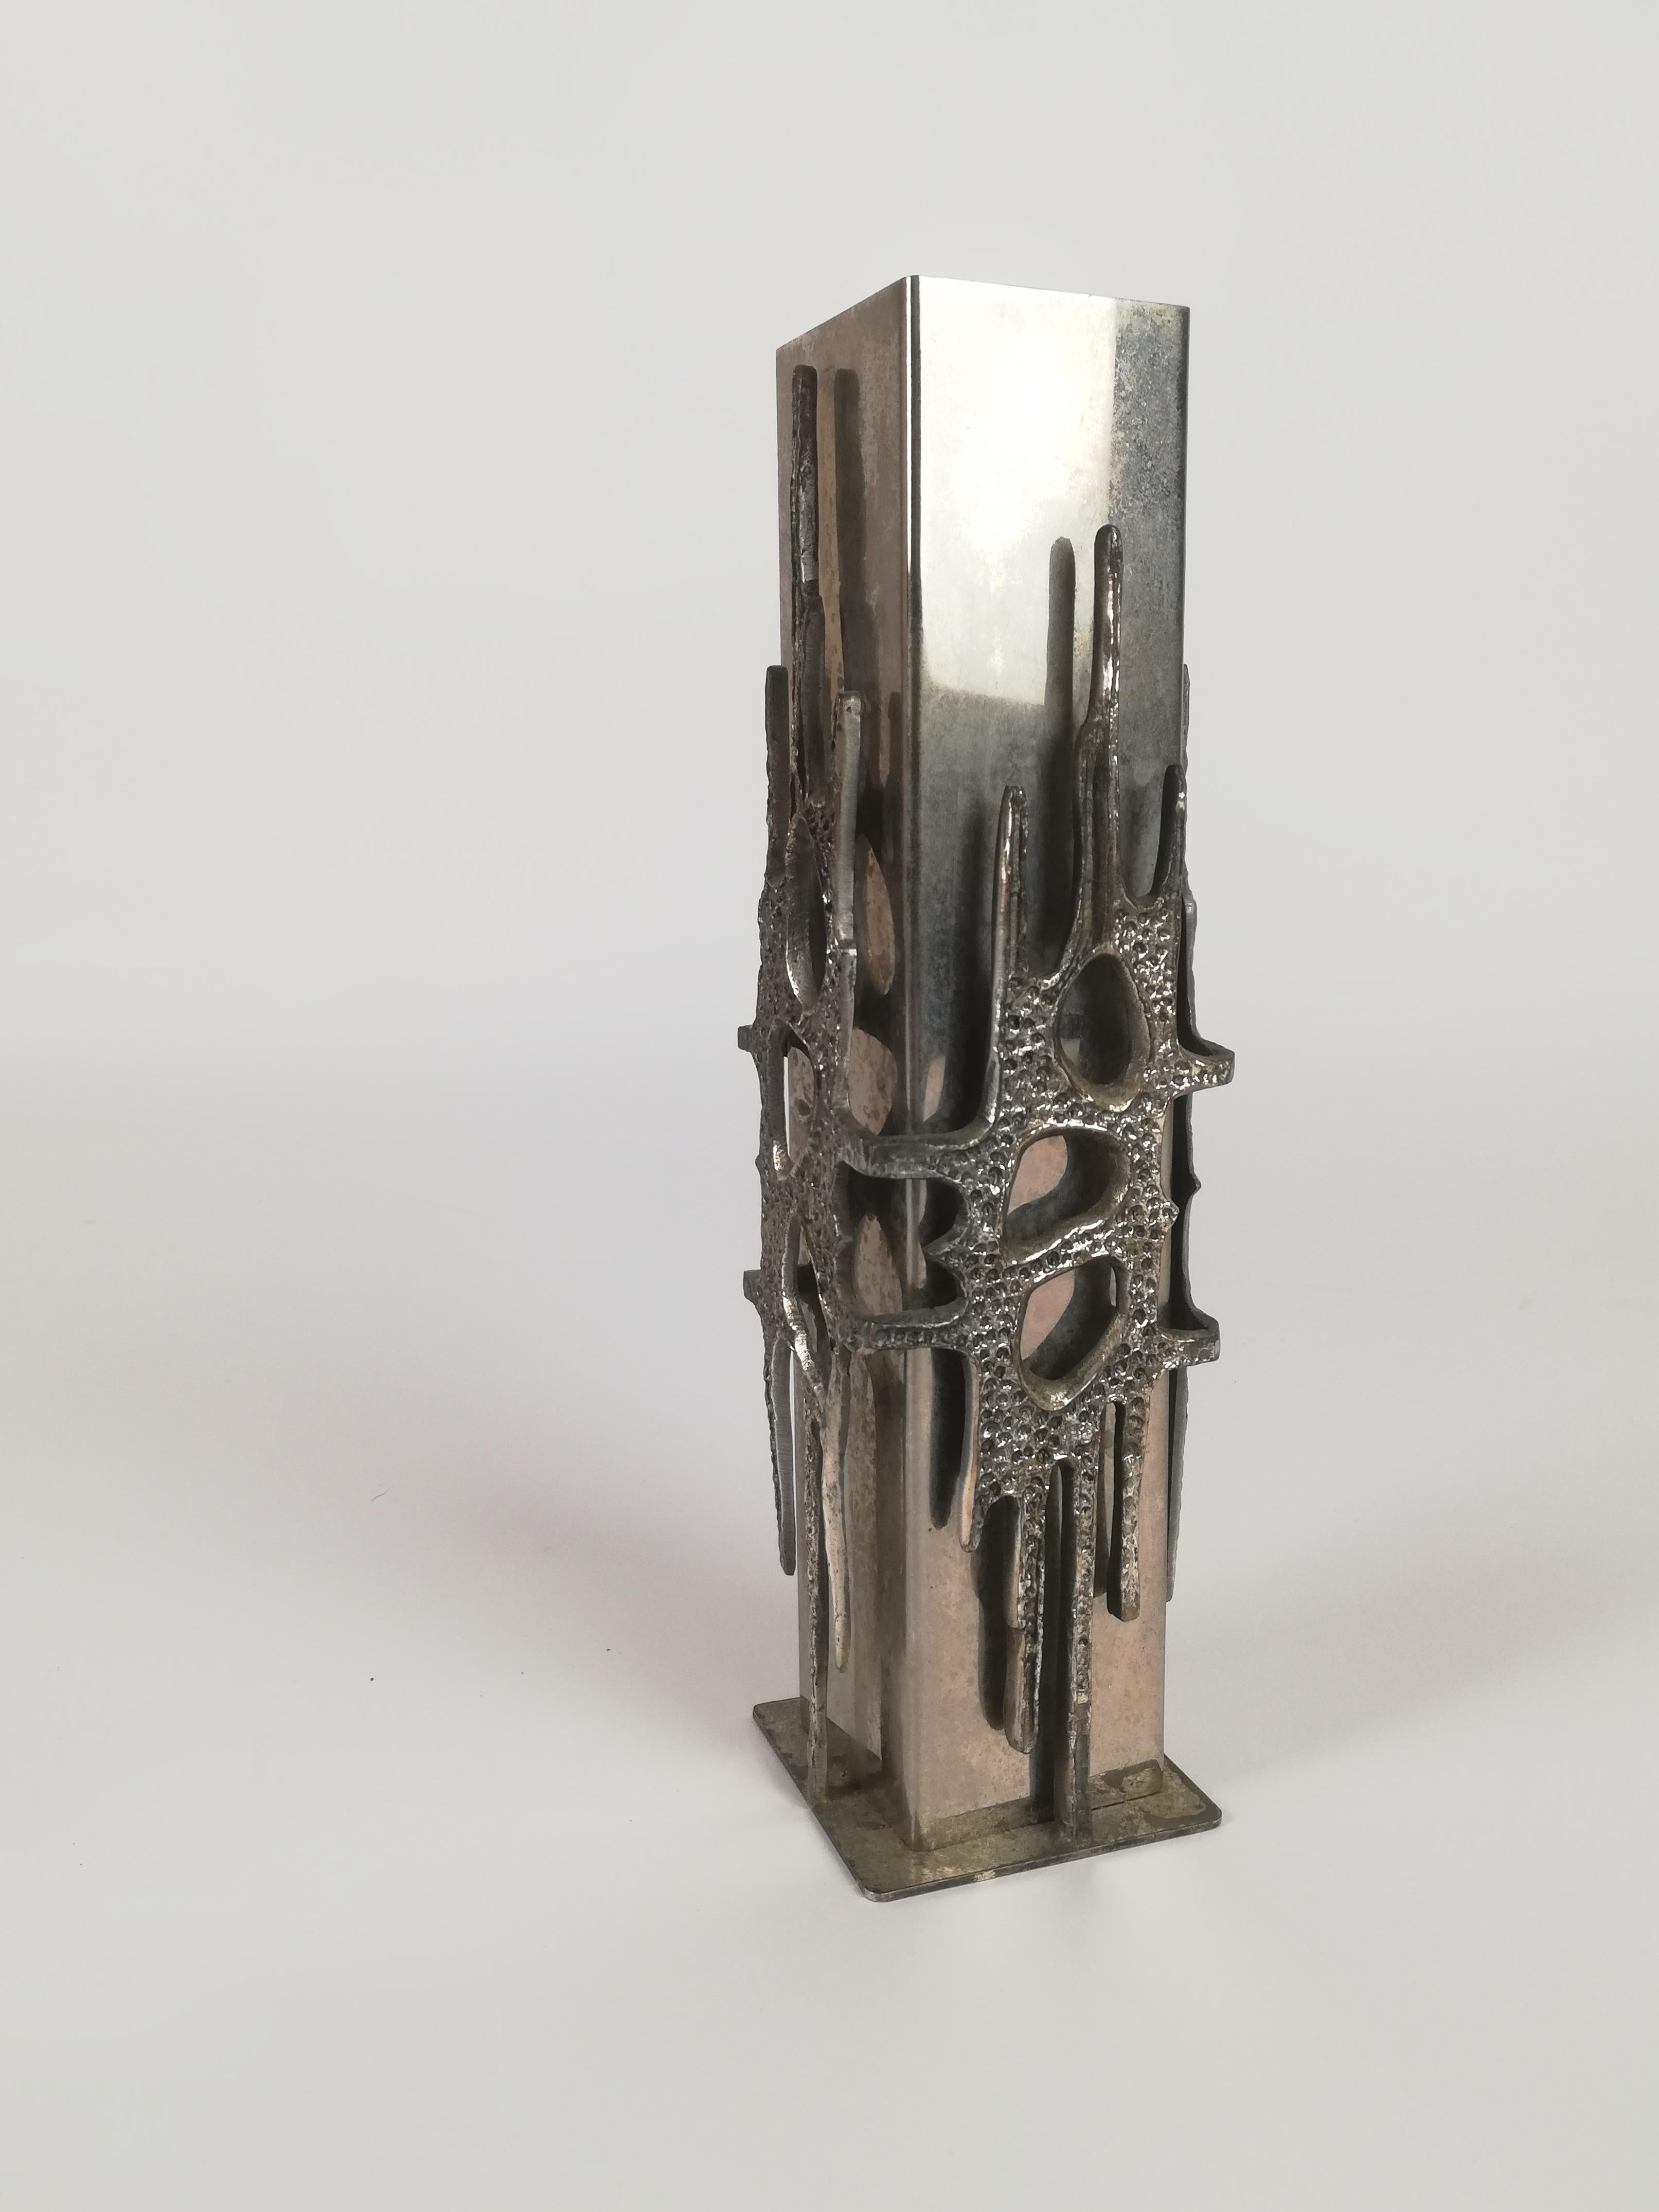 Brutalist Italian Steel Vase in the Style of Luciano Frigerio, Italy 1970s For Sale 2